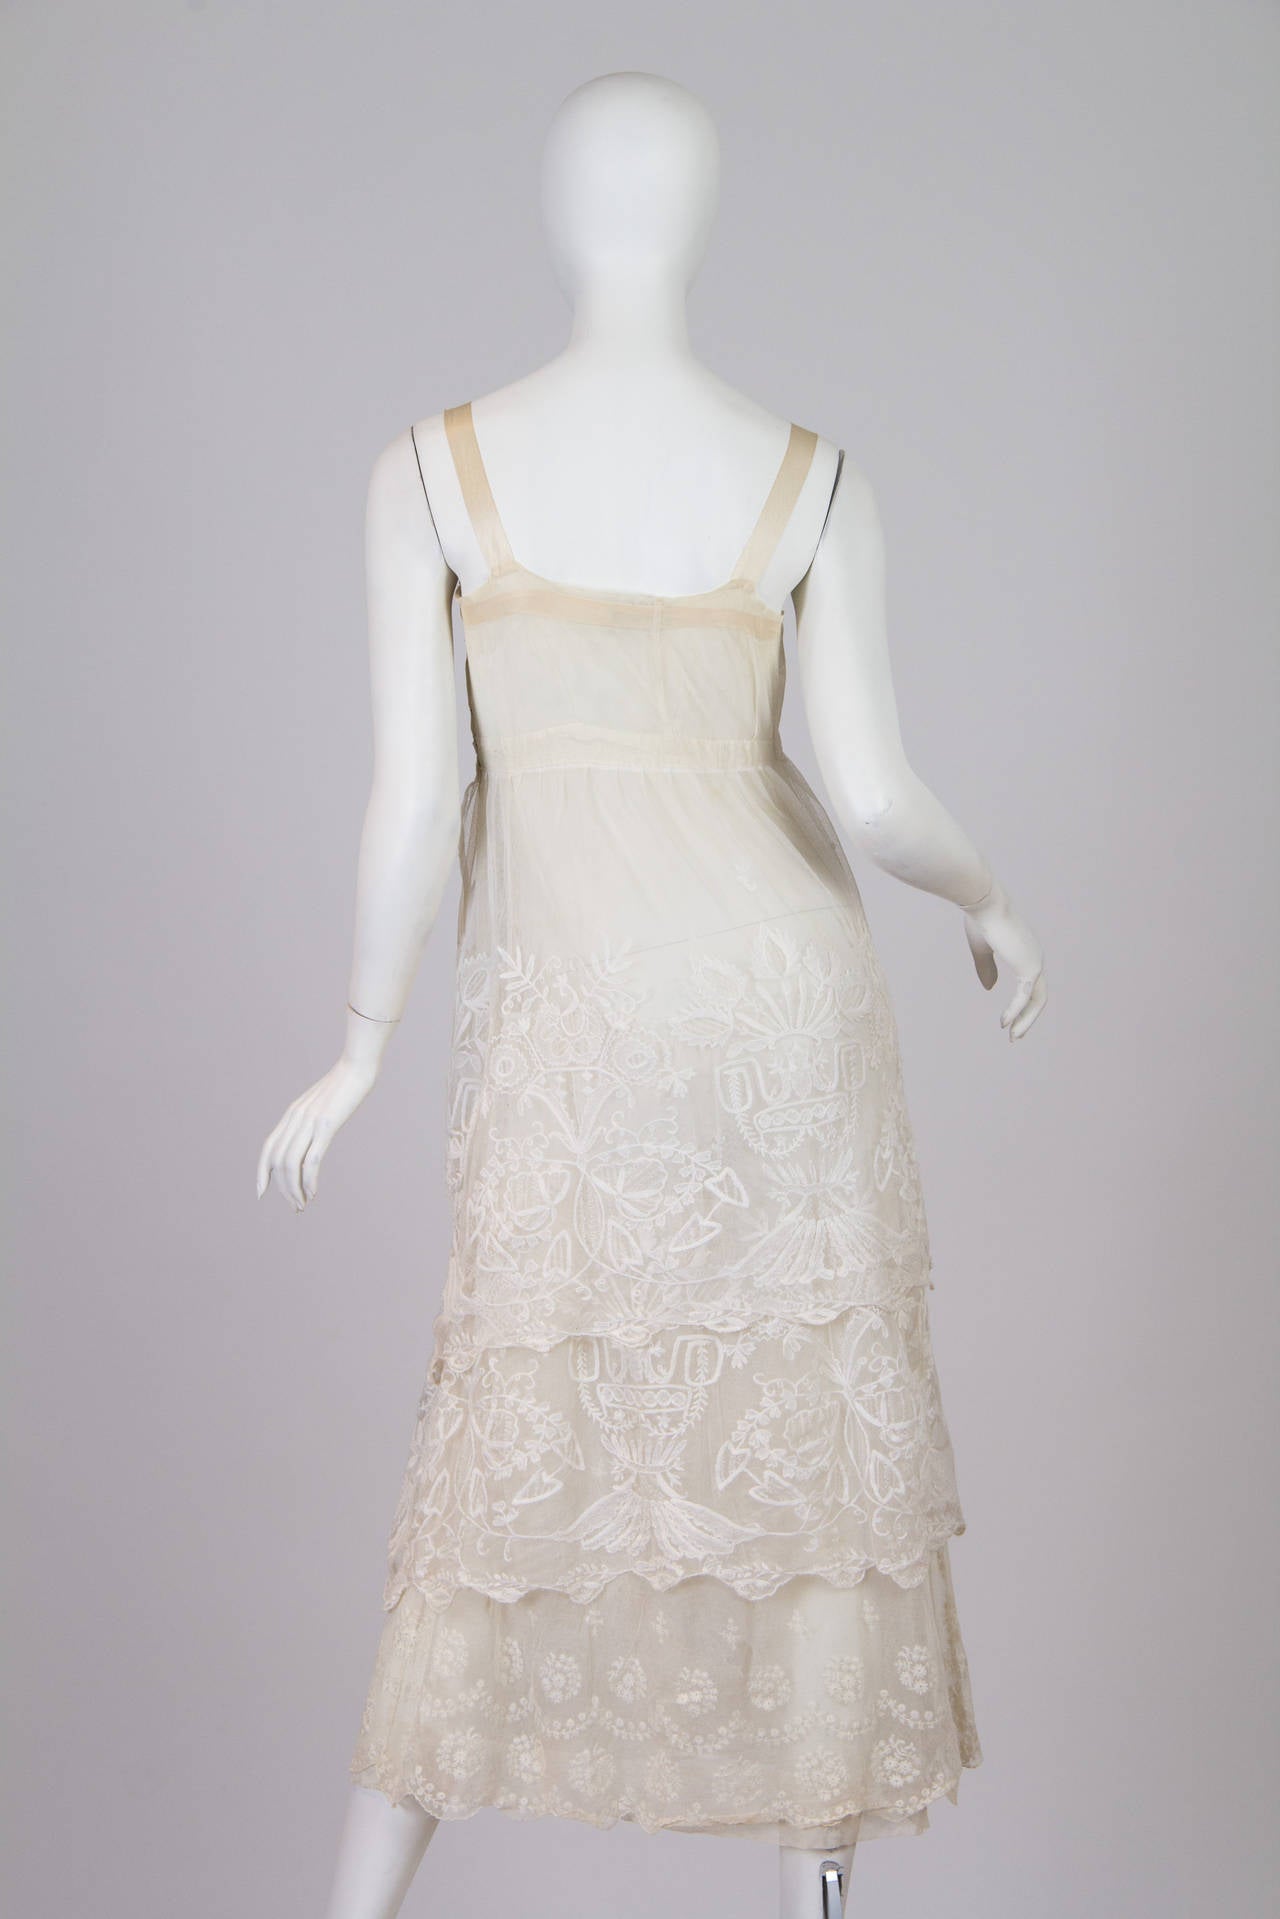 Edwardian Cotton Princess Lace Dress In Excellent Condition In New York, NY